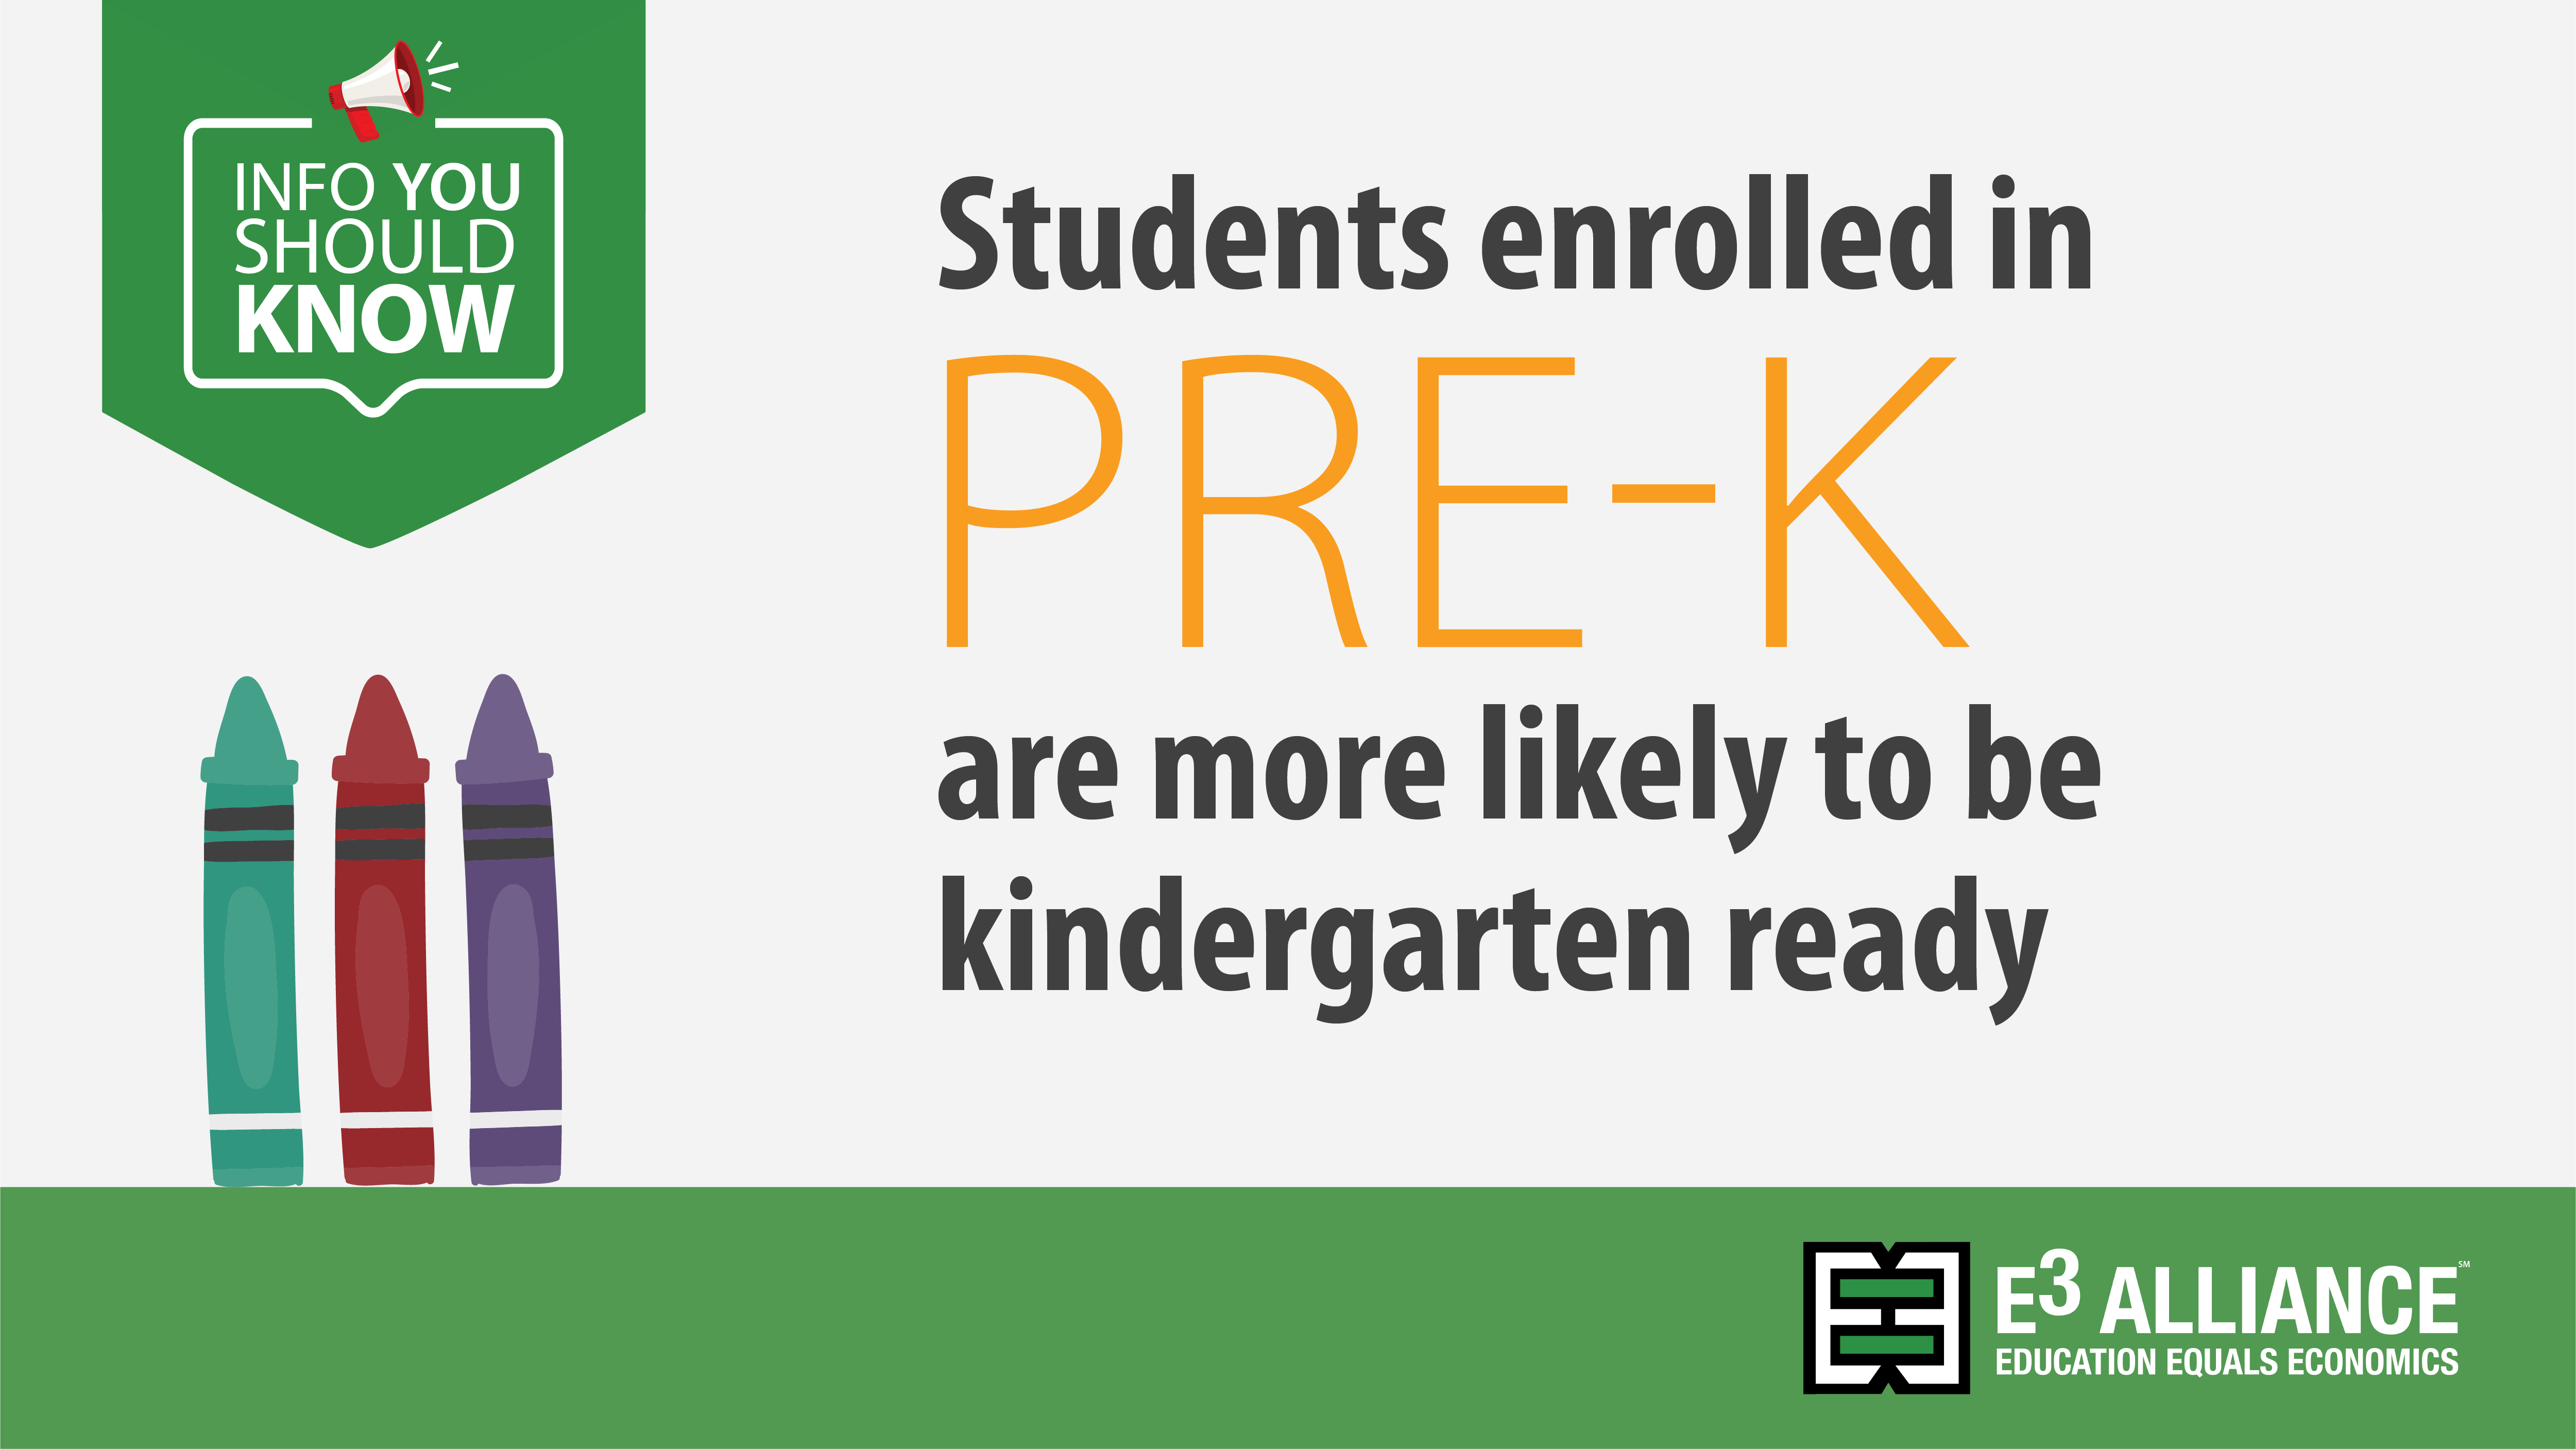 Students enrolled in pre-k are more likely to be kindergarten ready